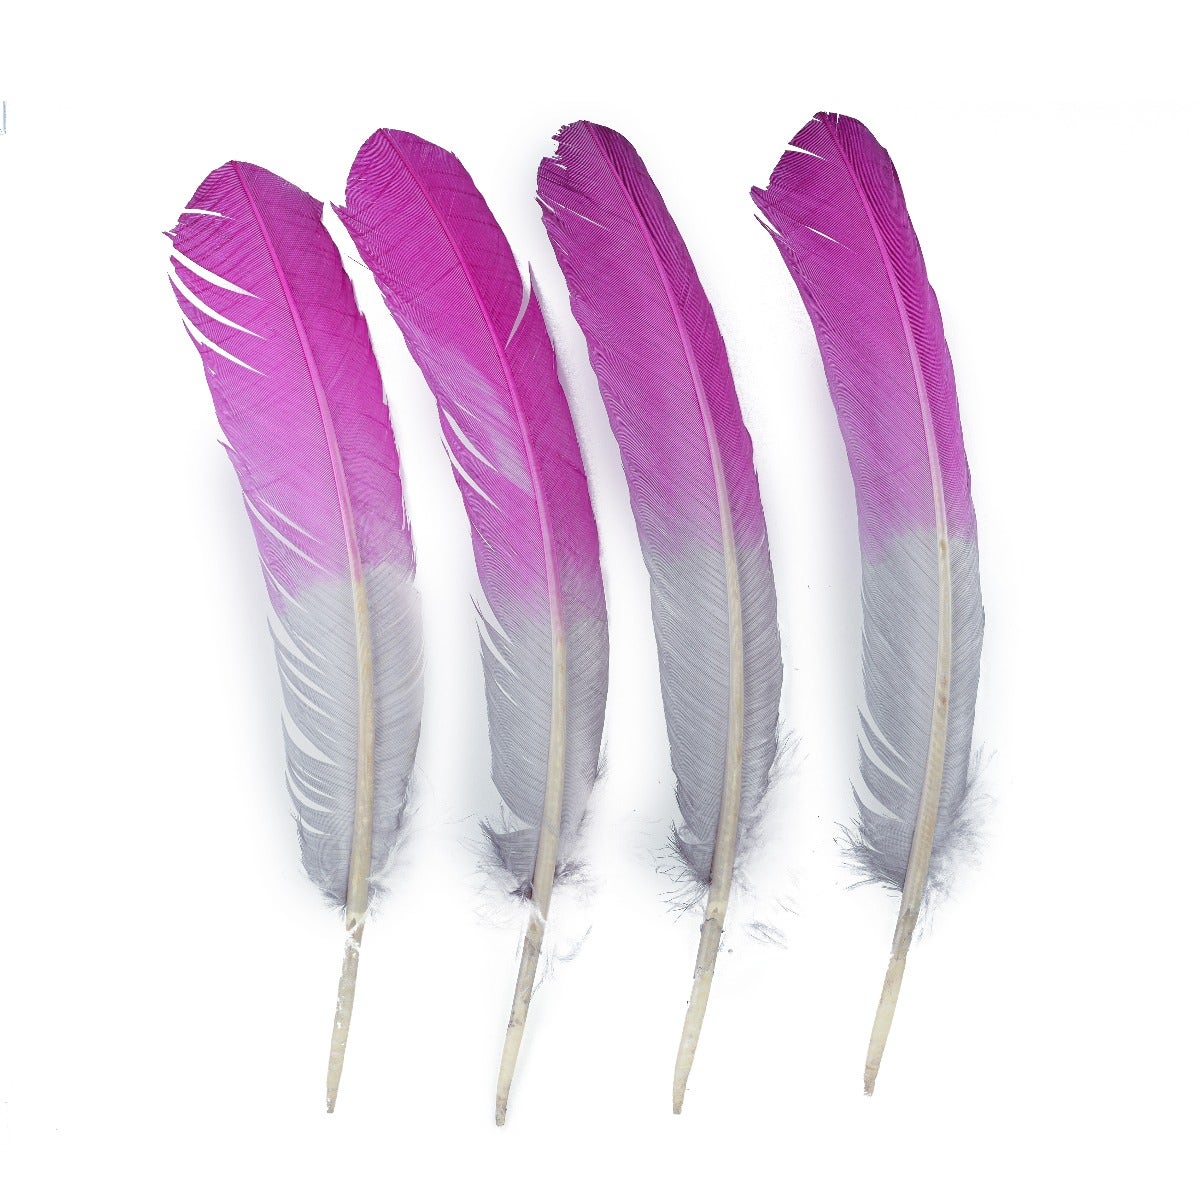 Bulk Two Tone Ombre Tipped Turkey Round Feathers - 10-12” - 1/4 lb - Very Berry/Silver